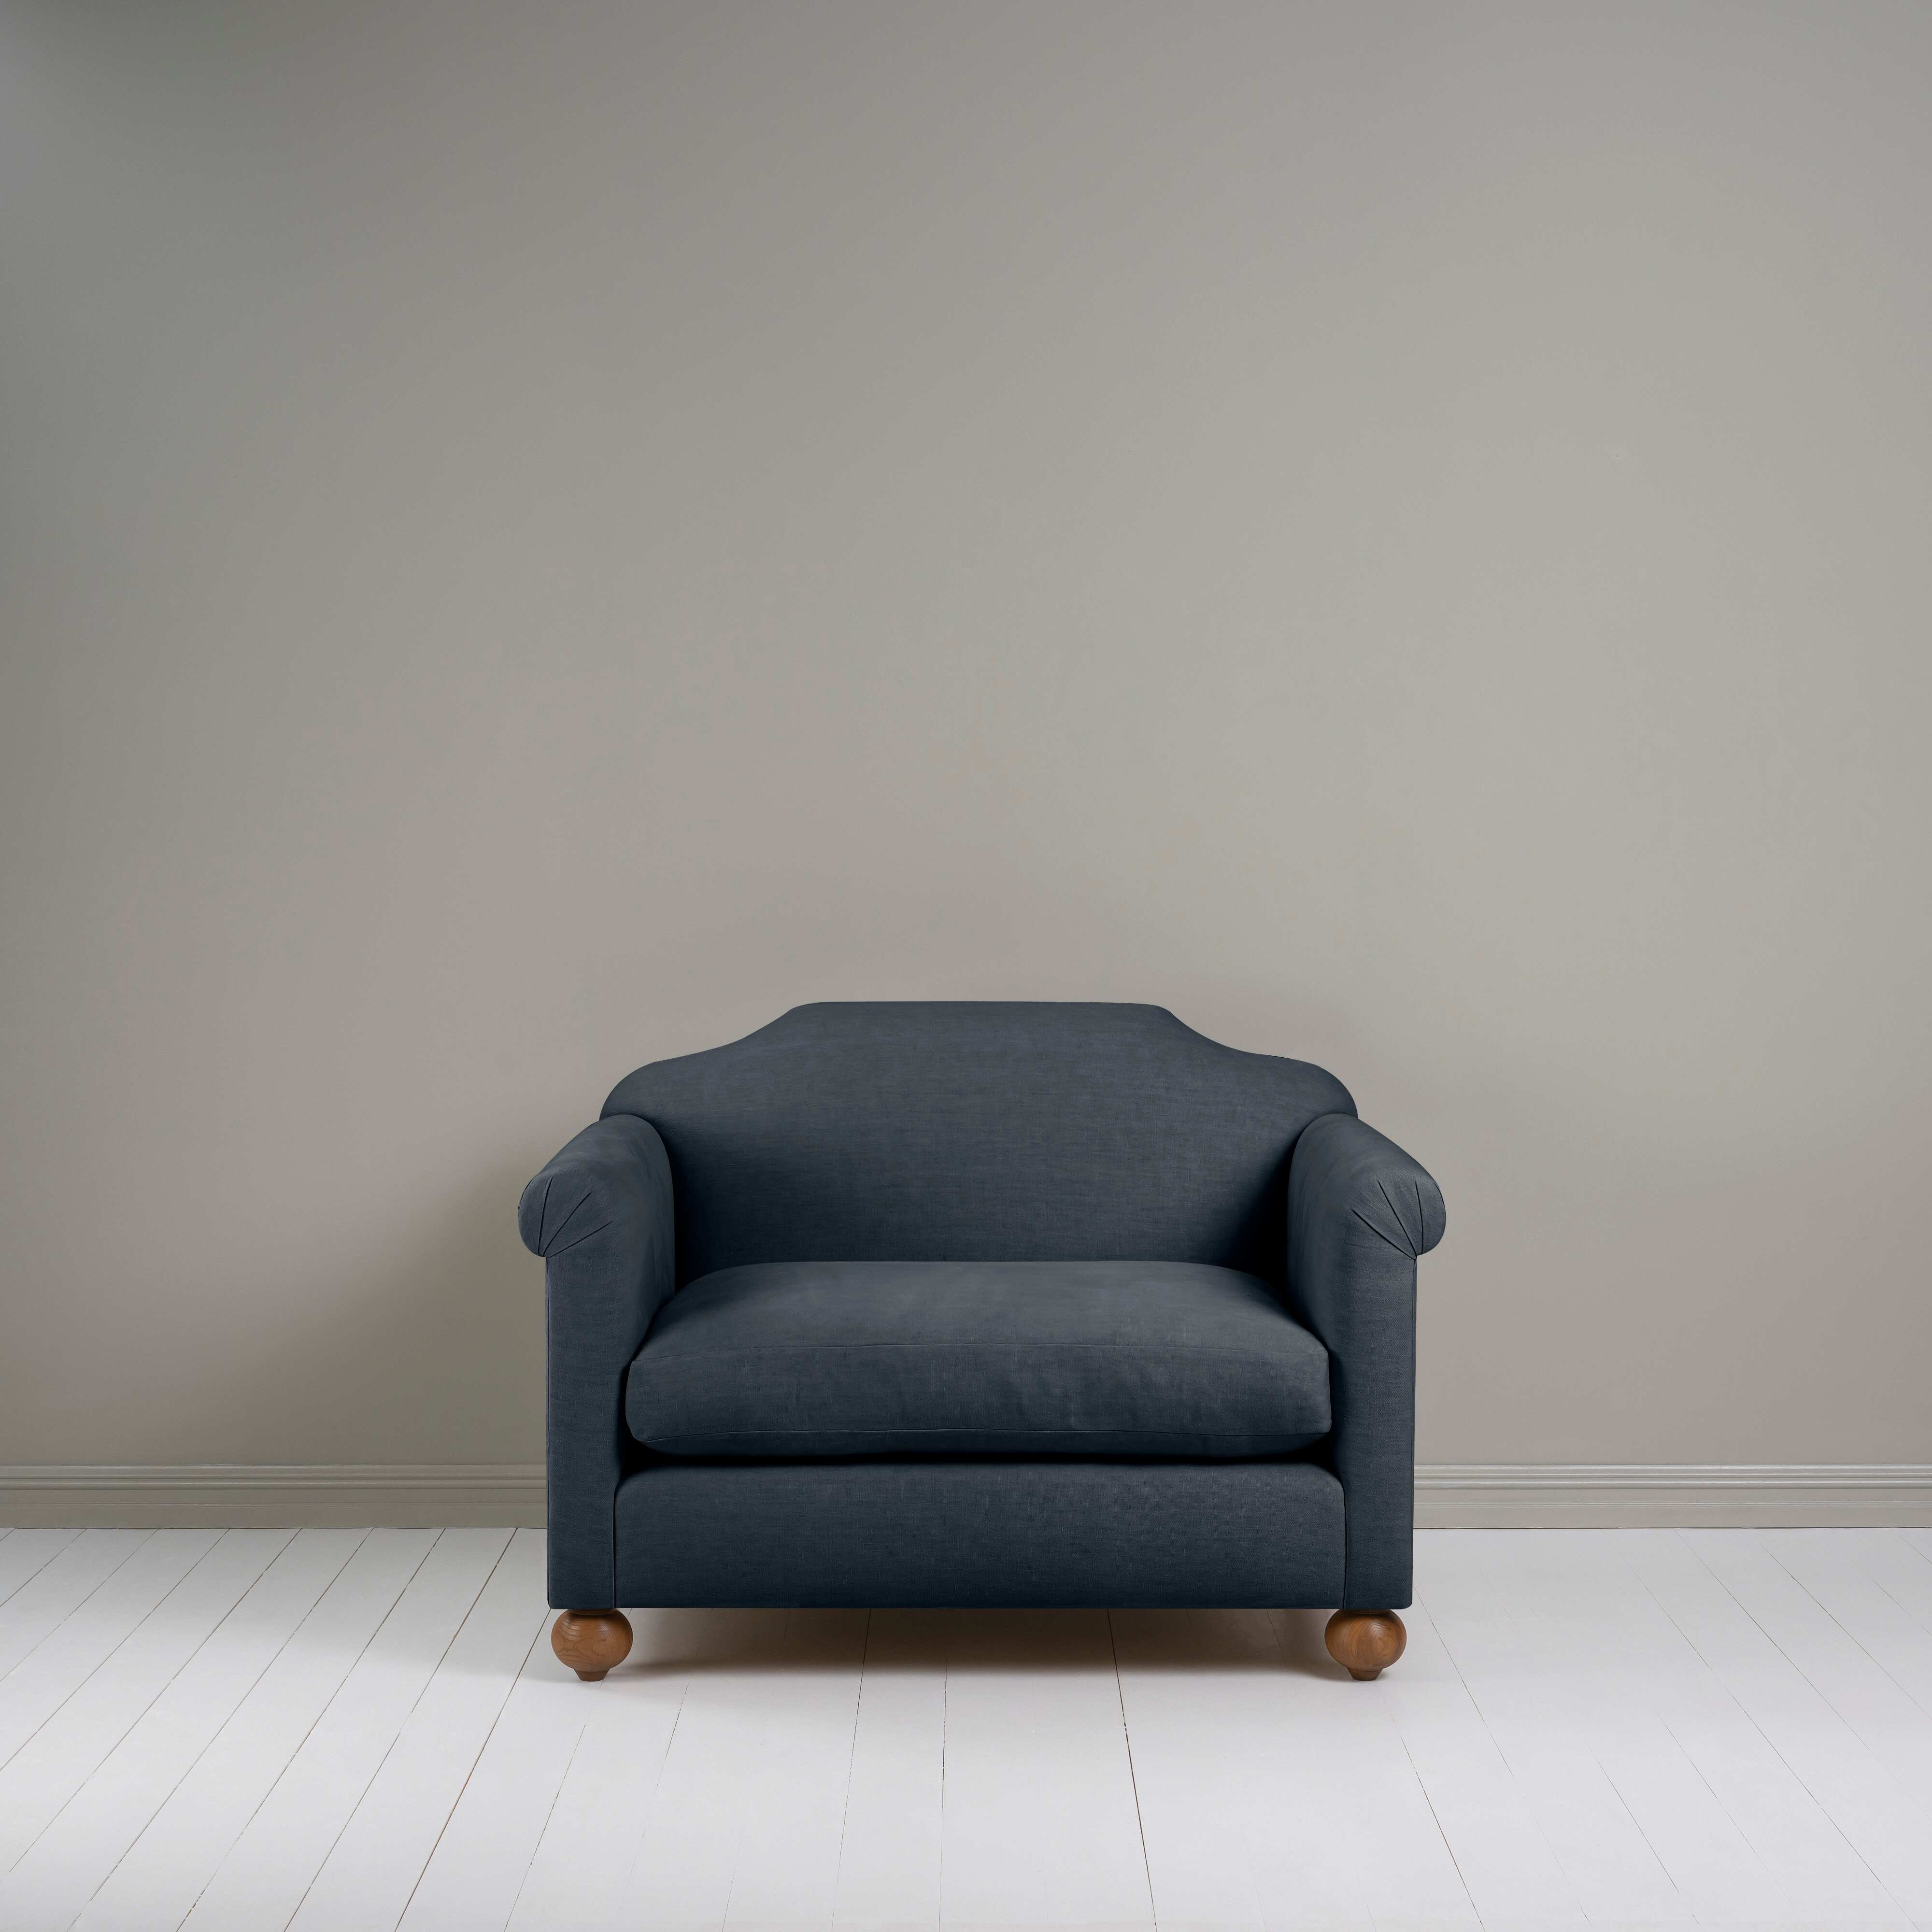  Dolittle Love Seat in Laidback Linen Midnight 